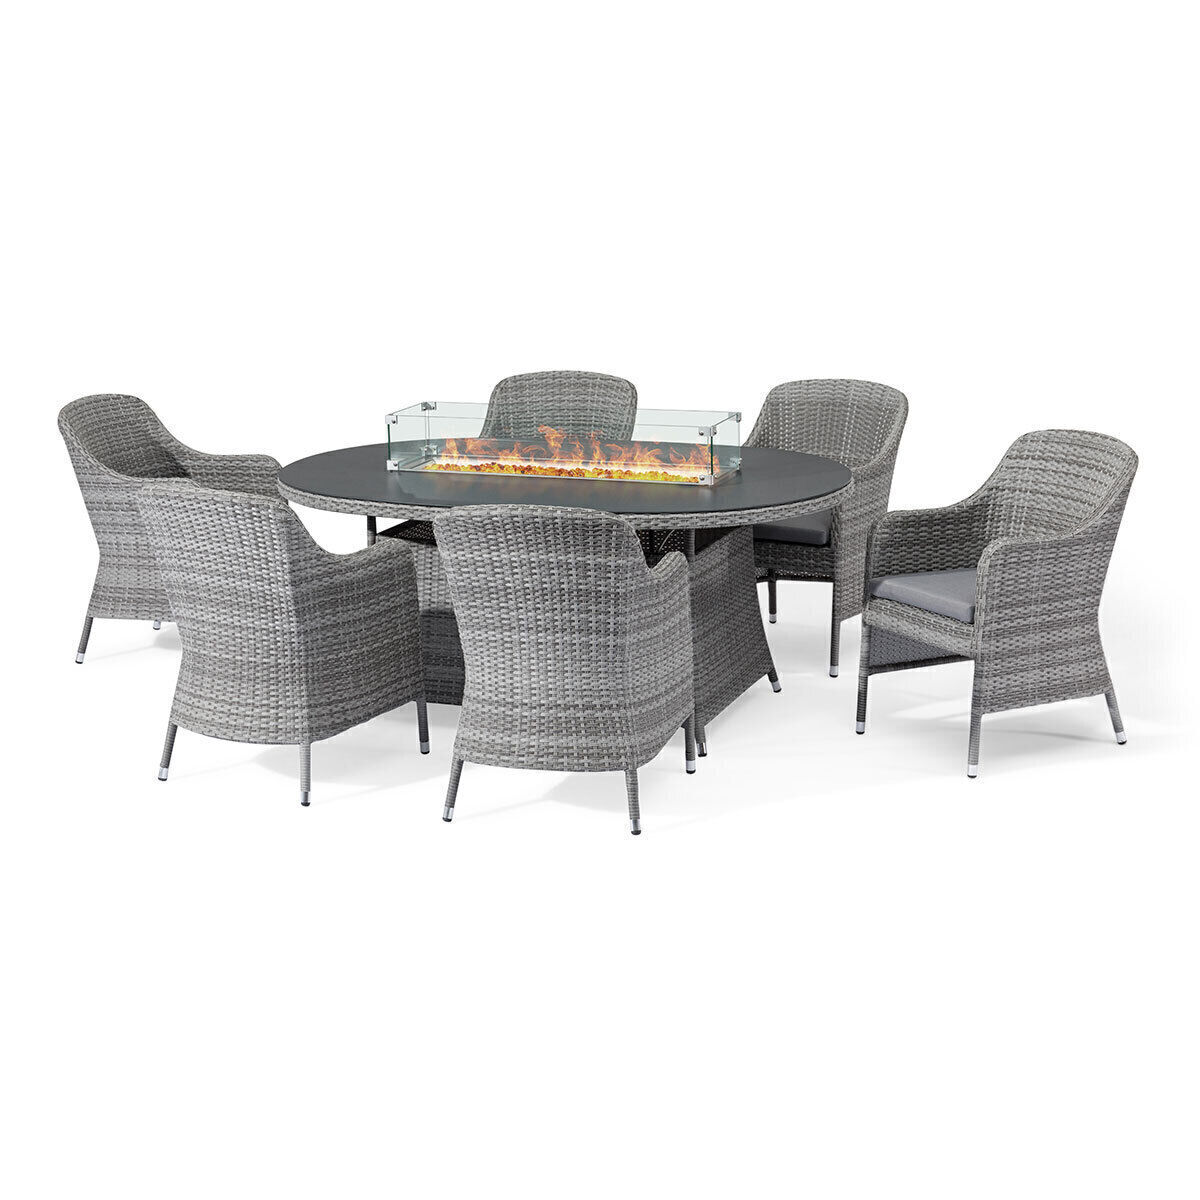 Maze - Santorini 6 Seat Oval Rattan Dining Set with Fire Pit Table product image